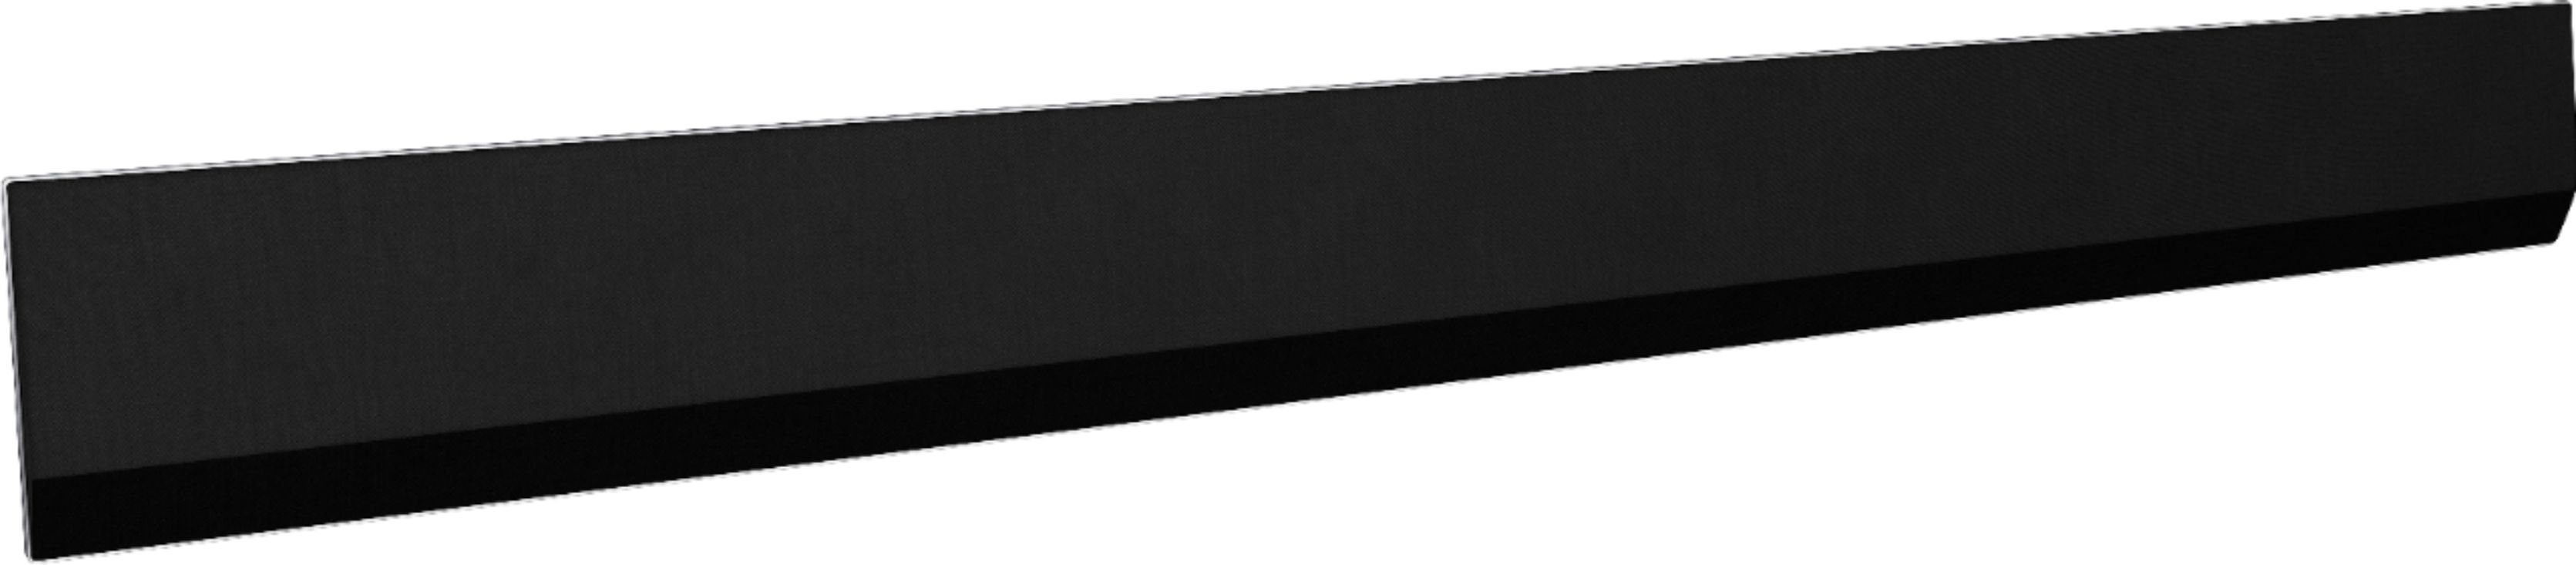 Angle View: LG - 3.1-Channel 420W Soundbar System with Wireless Subwoofer and Dolby Atmos - Black